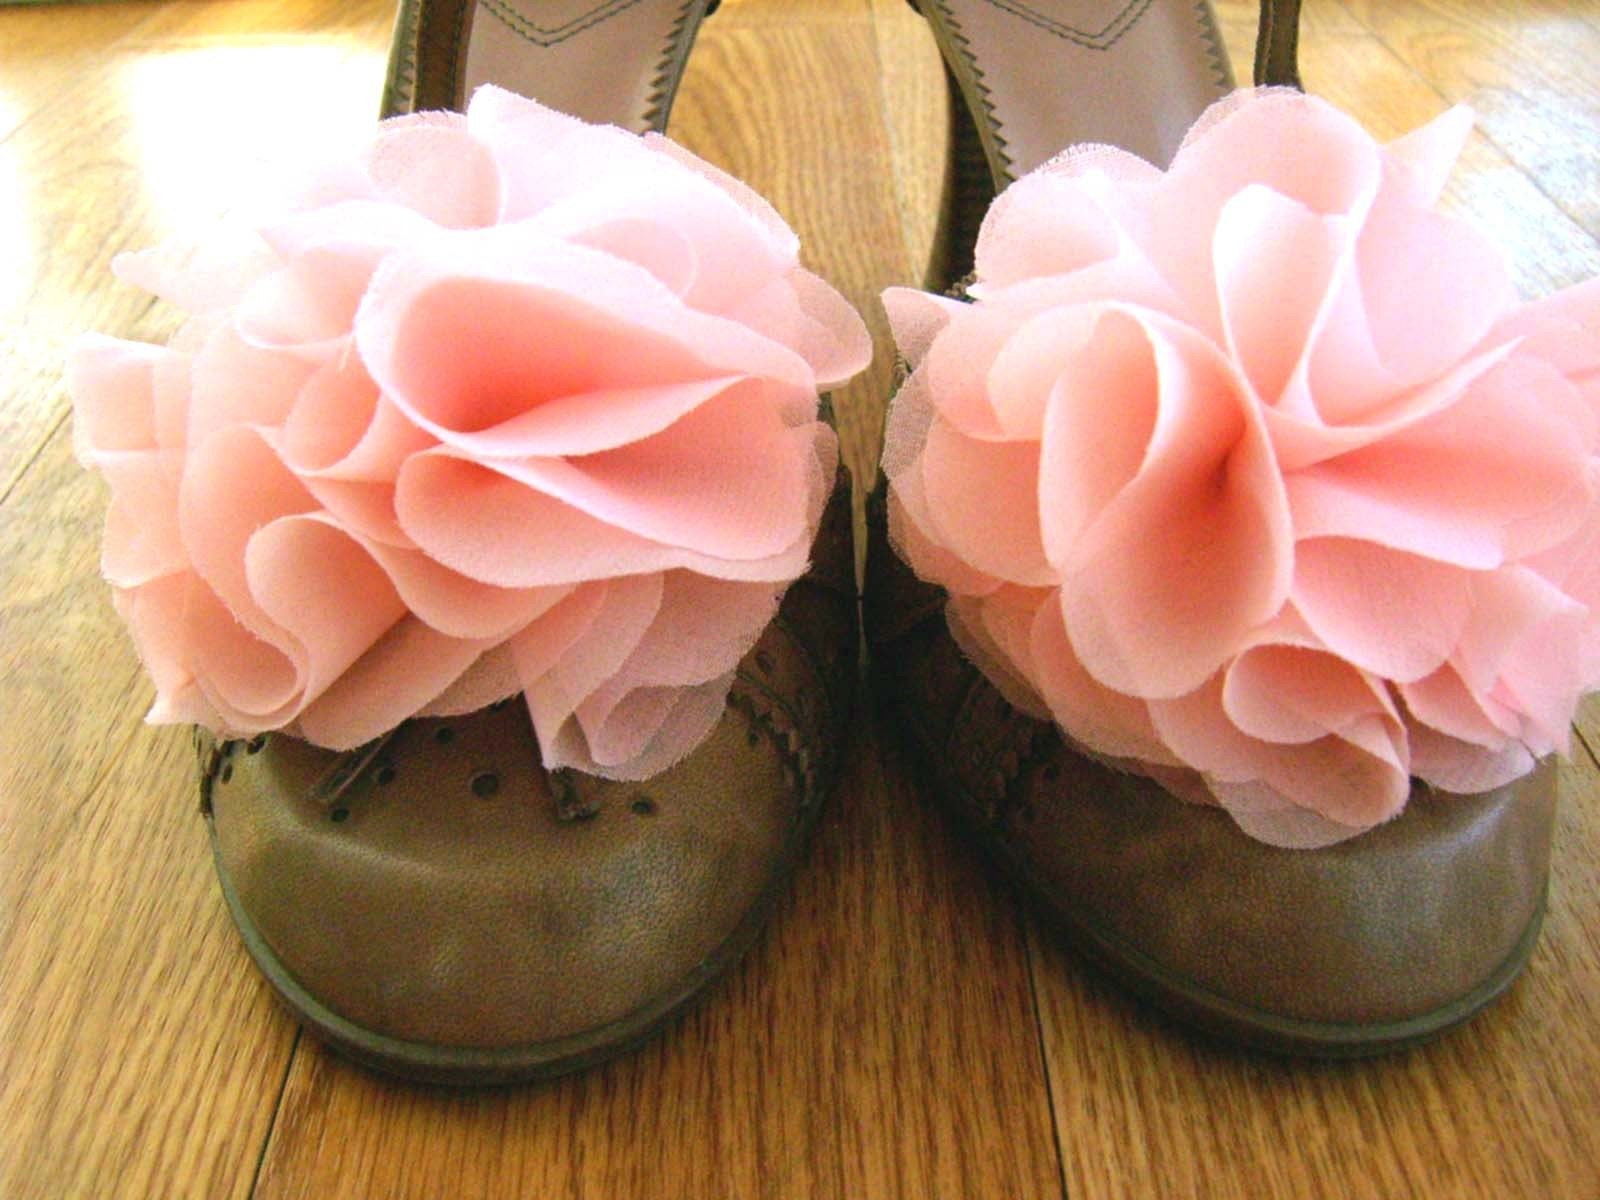 Friday Finds: Gorgeous Shoe Clips! via TheELD.com